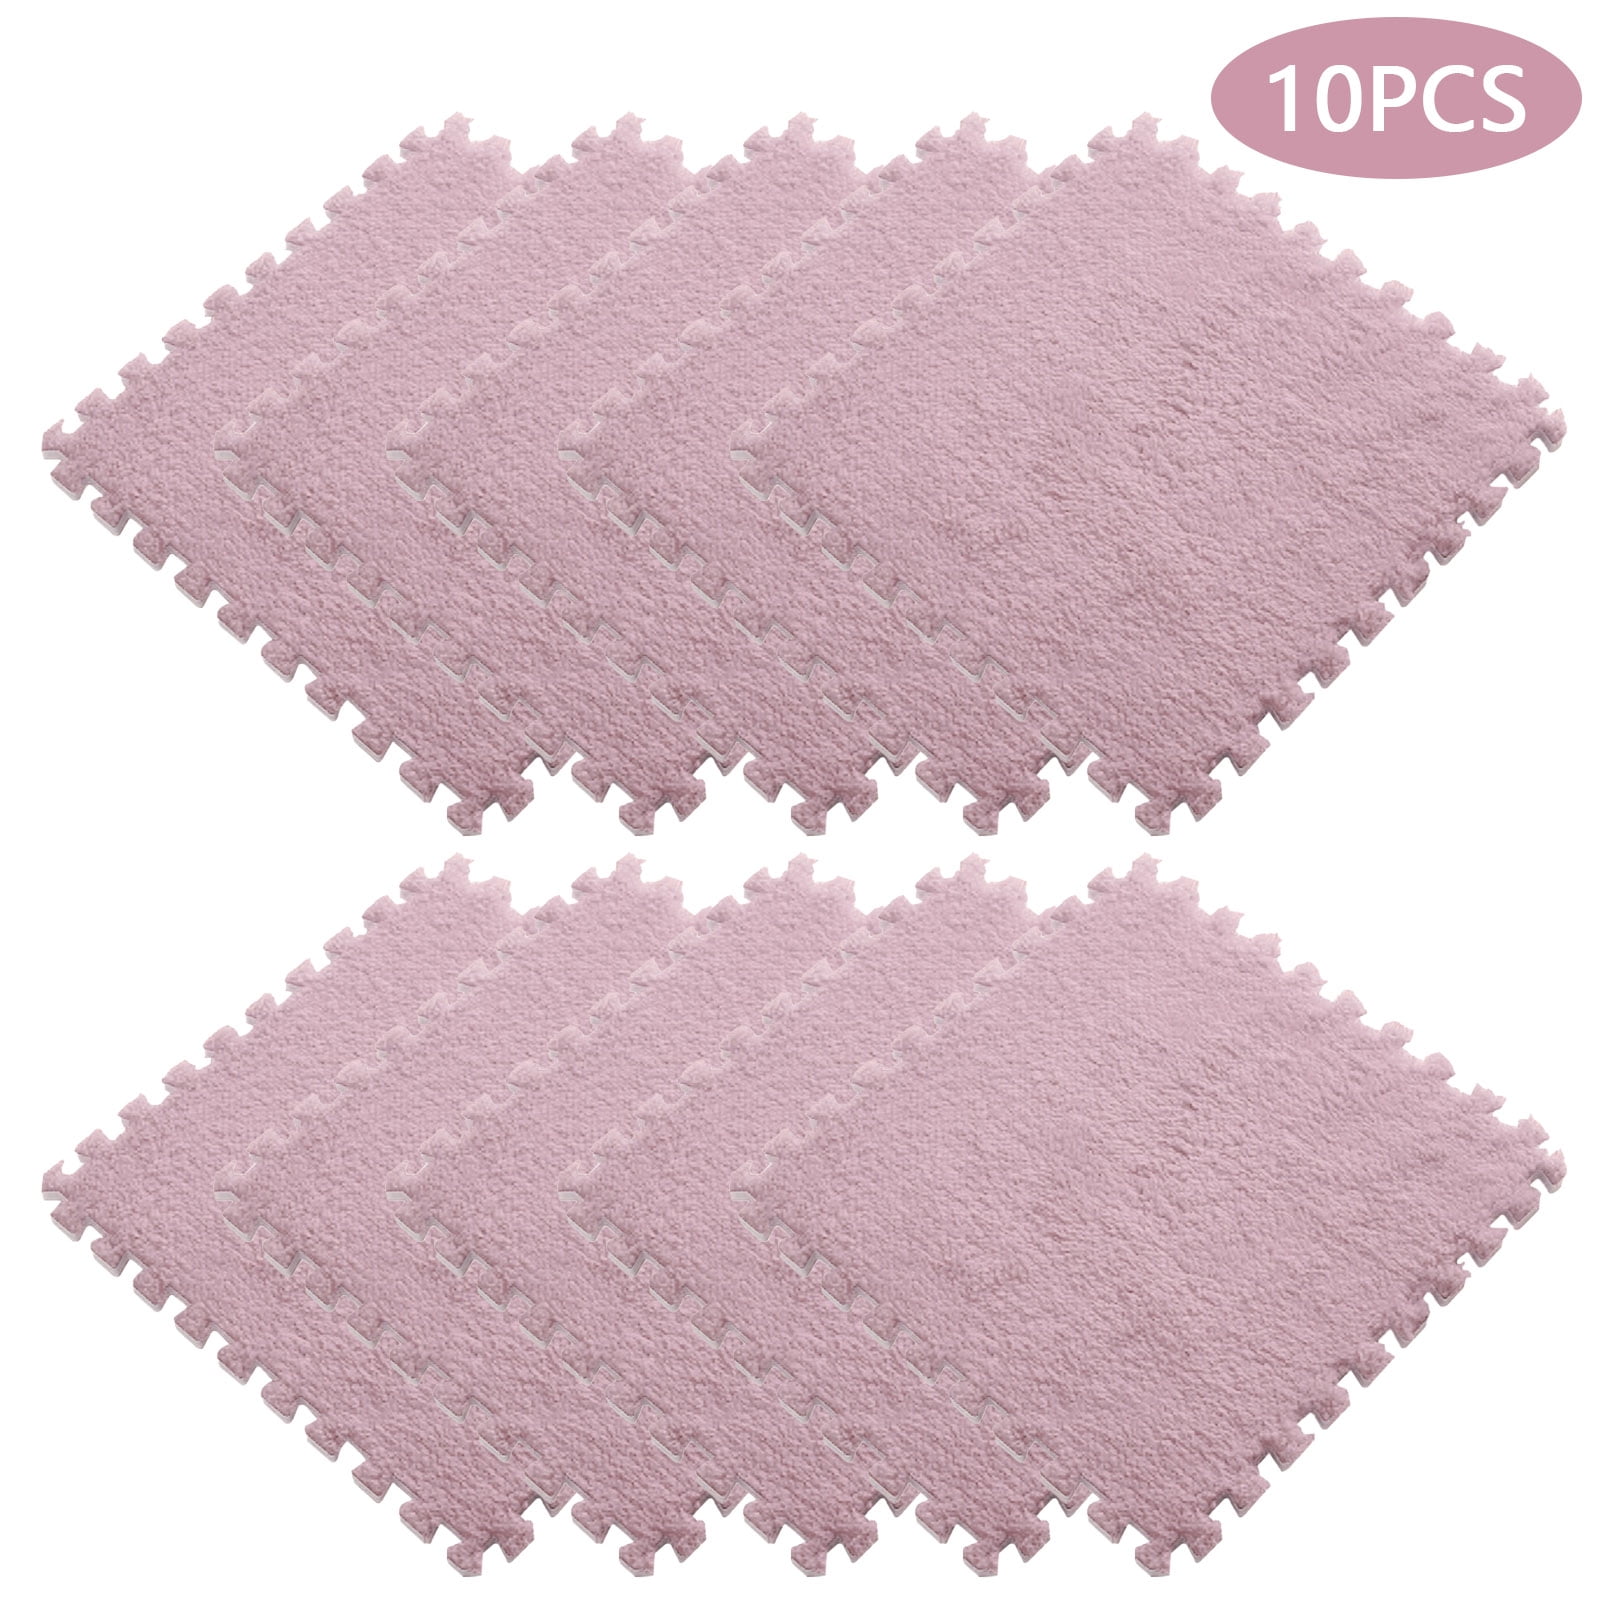 CARPETBOX - Large 16 Piece Square Plush Puzzle Foam Floor Mat Thickened Interlocking Carpet Tiles with Padding for Toddler Baby Playroom - Anti Slip